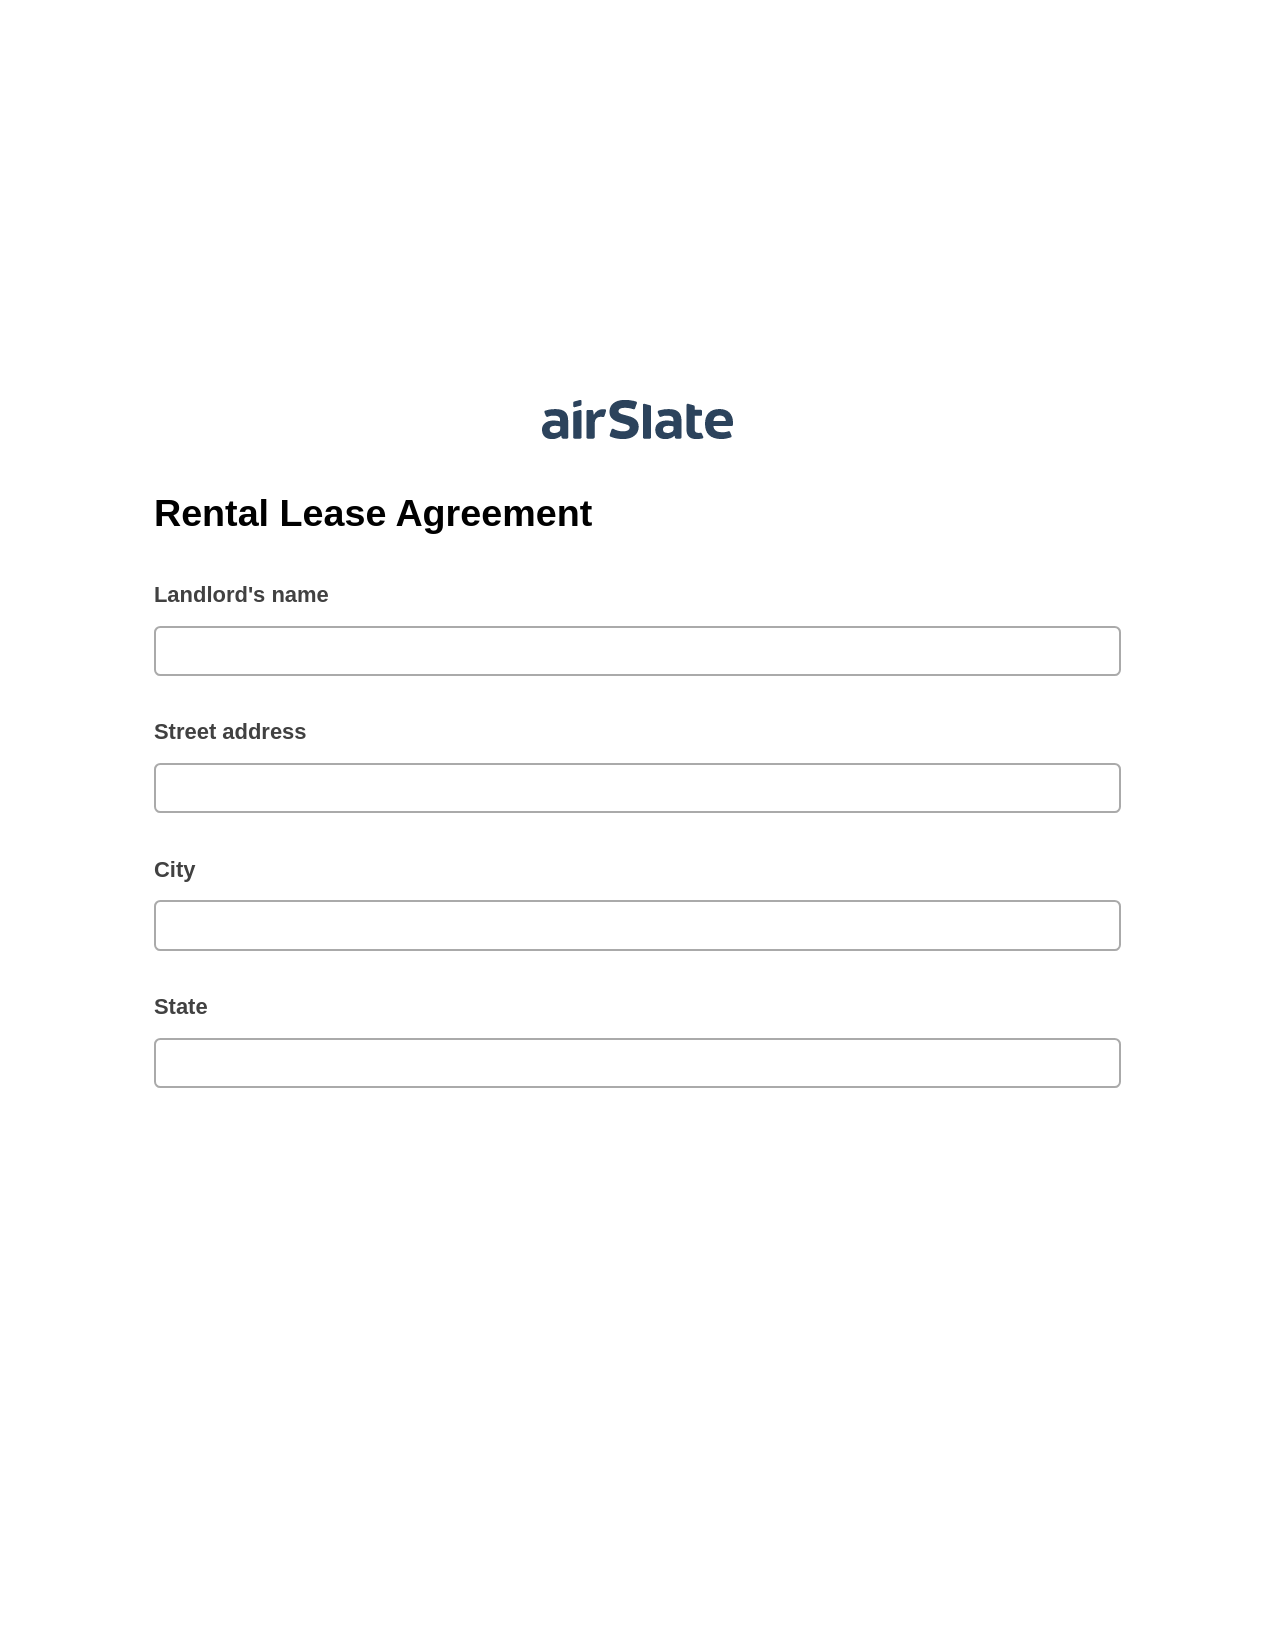 Rental Lease Agreement Pre-fill from CSV File Dropdown Options Bot, Document Hide Bot, Export to Salesforce Bot